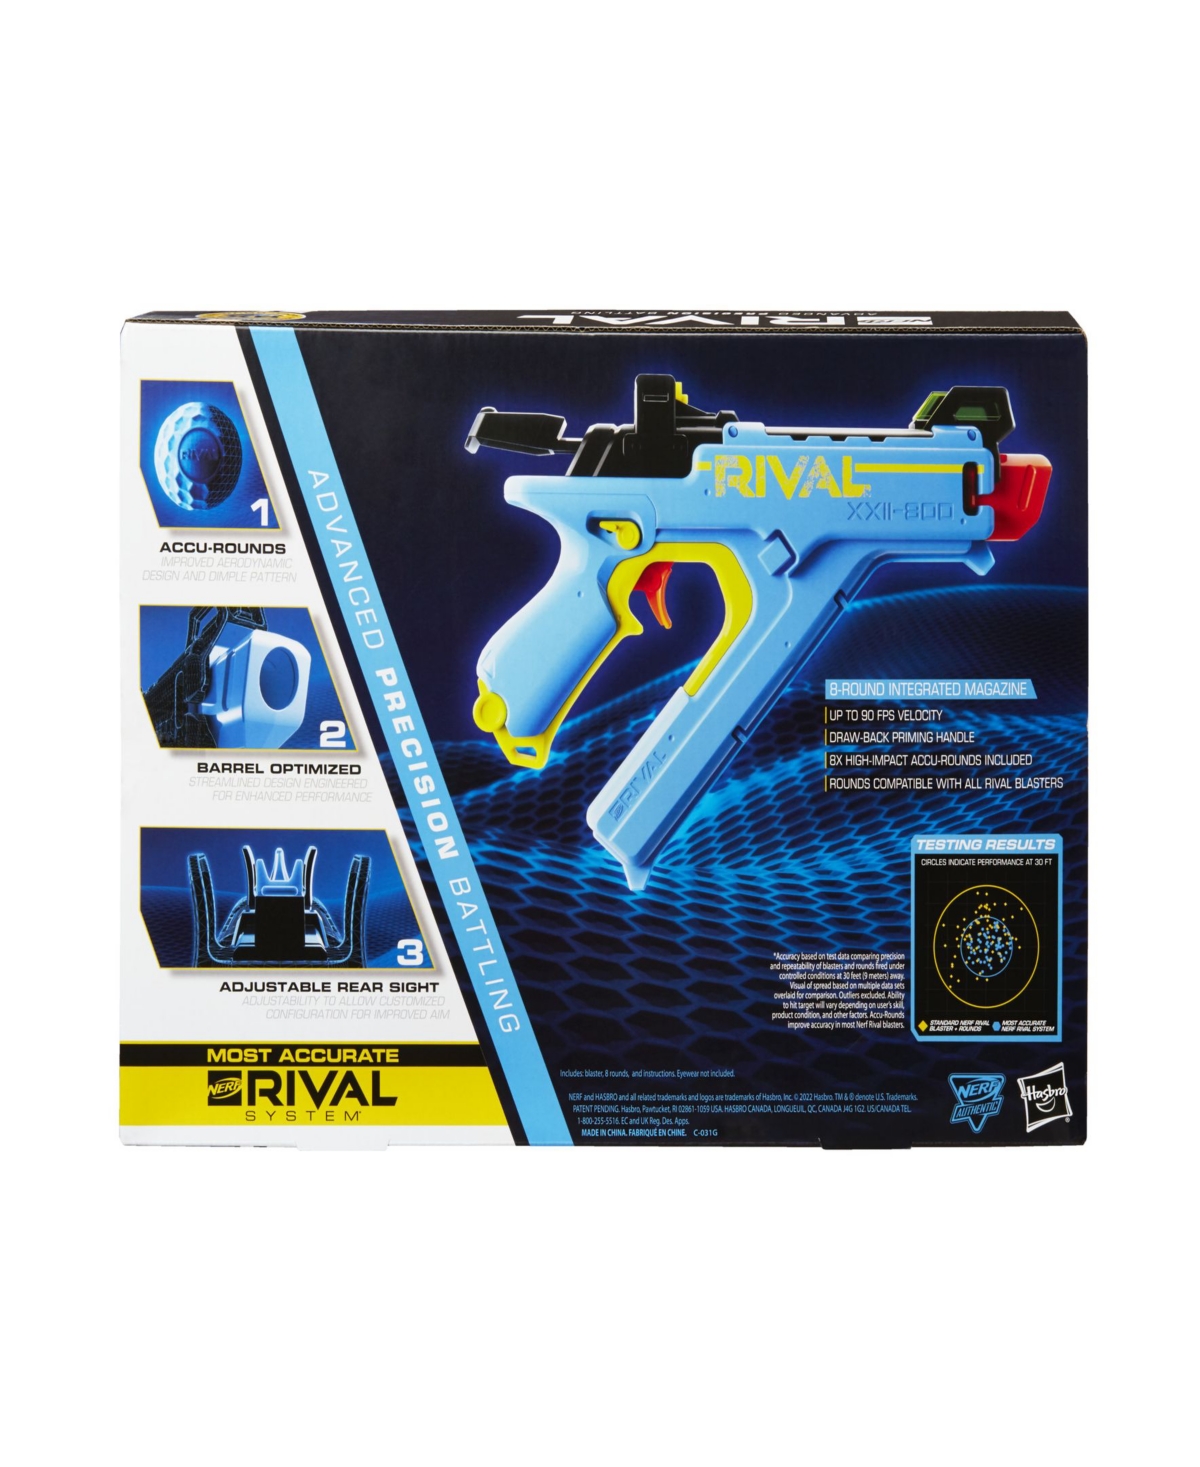 Shop Nerf Rival Vision Xxii-800 In No Color